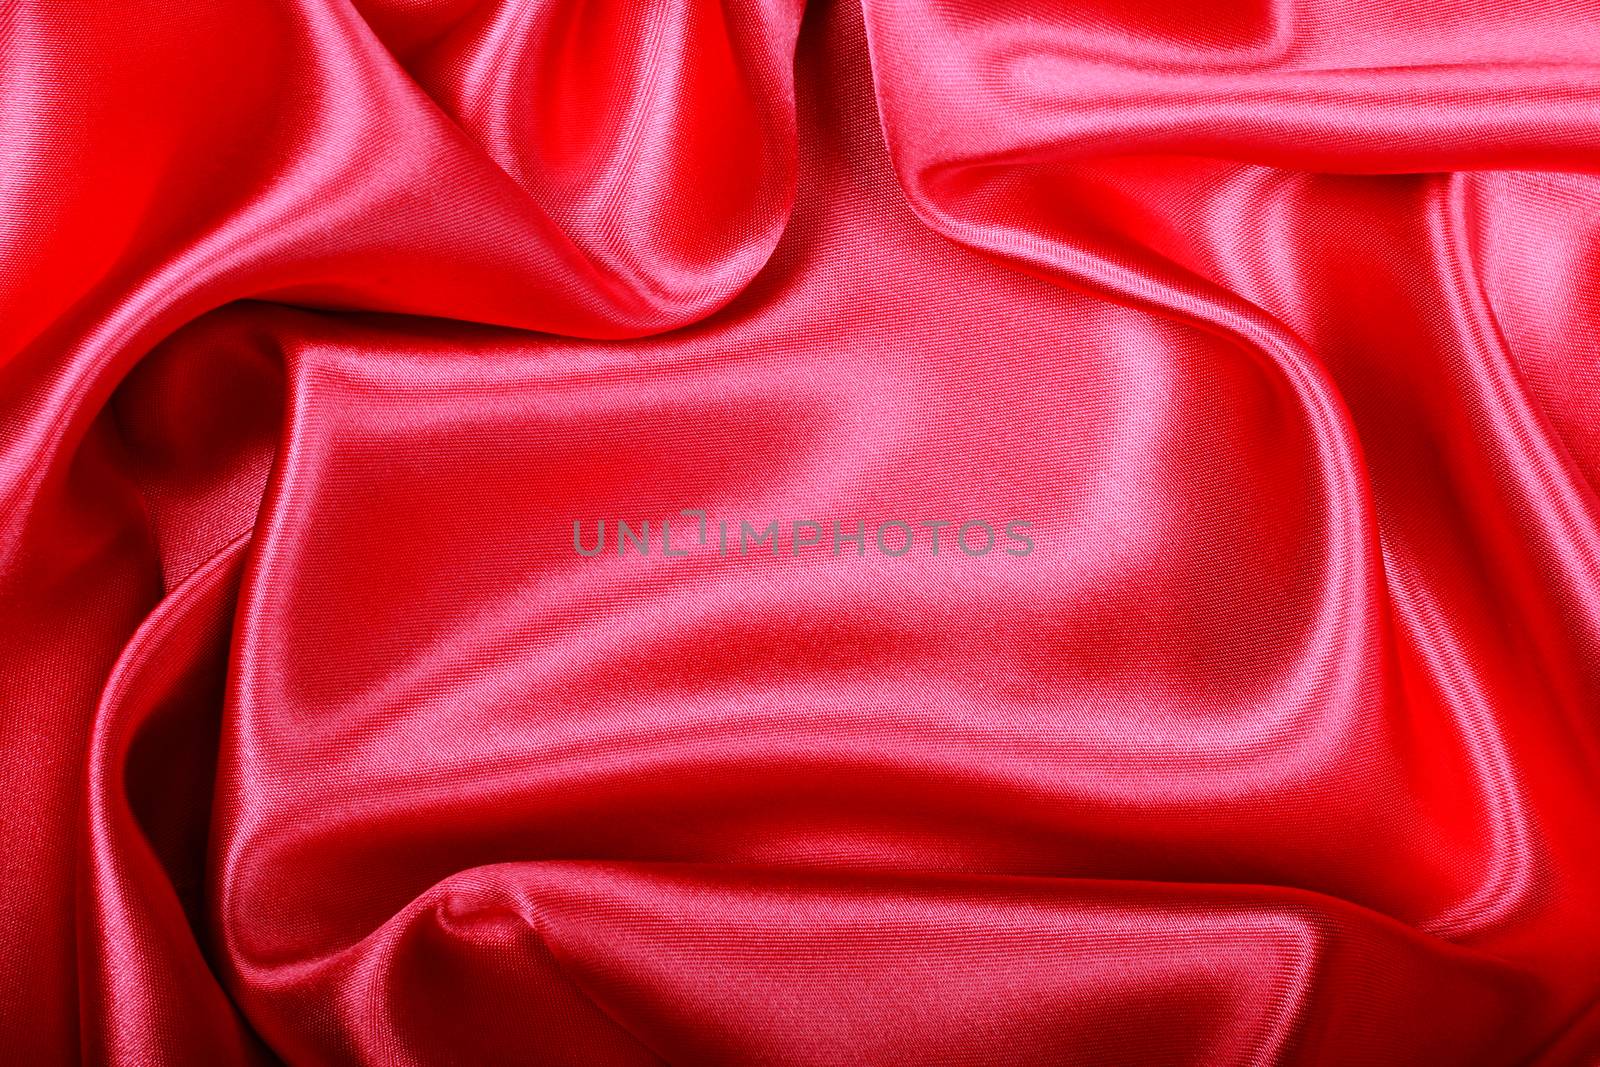 Smooth elegant red silk or satin texture as background  by oxanatravel